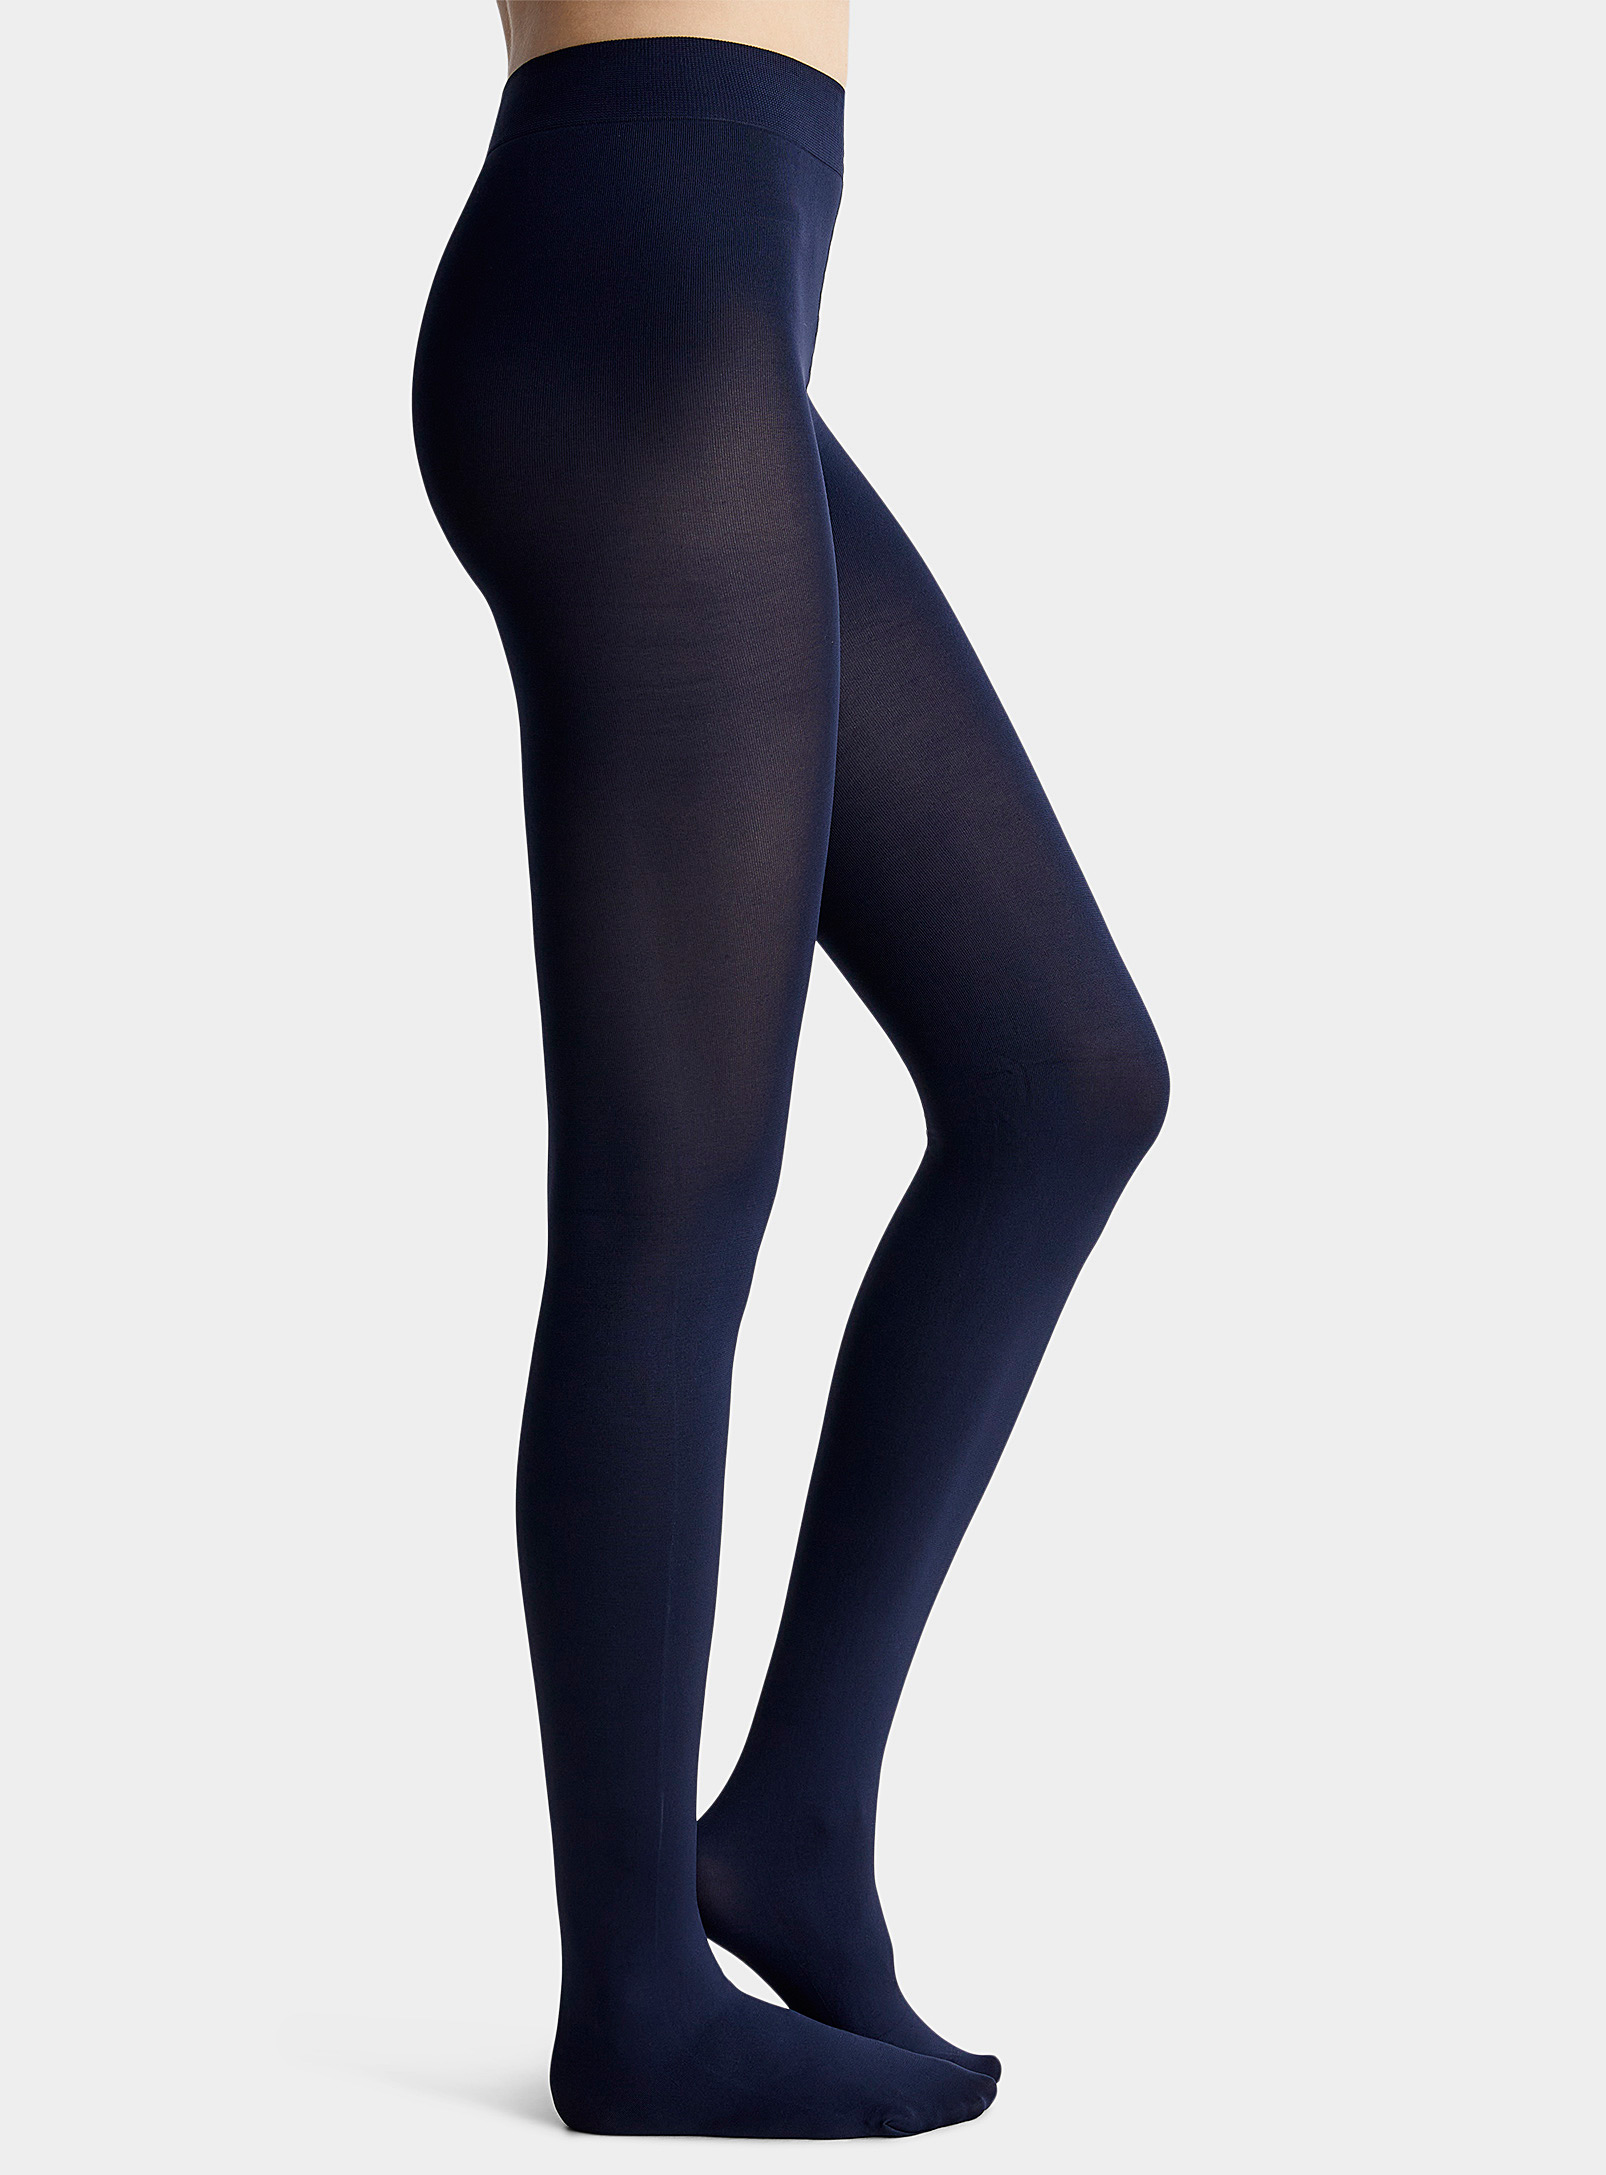 Simons - Women's Solid 3D microfibre tights